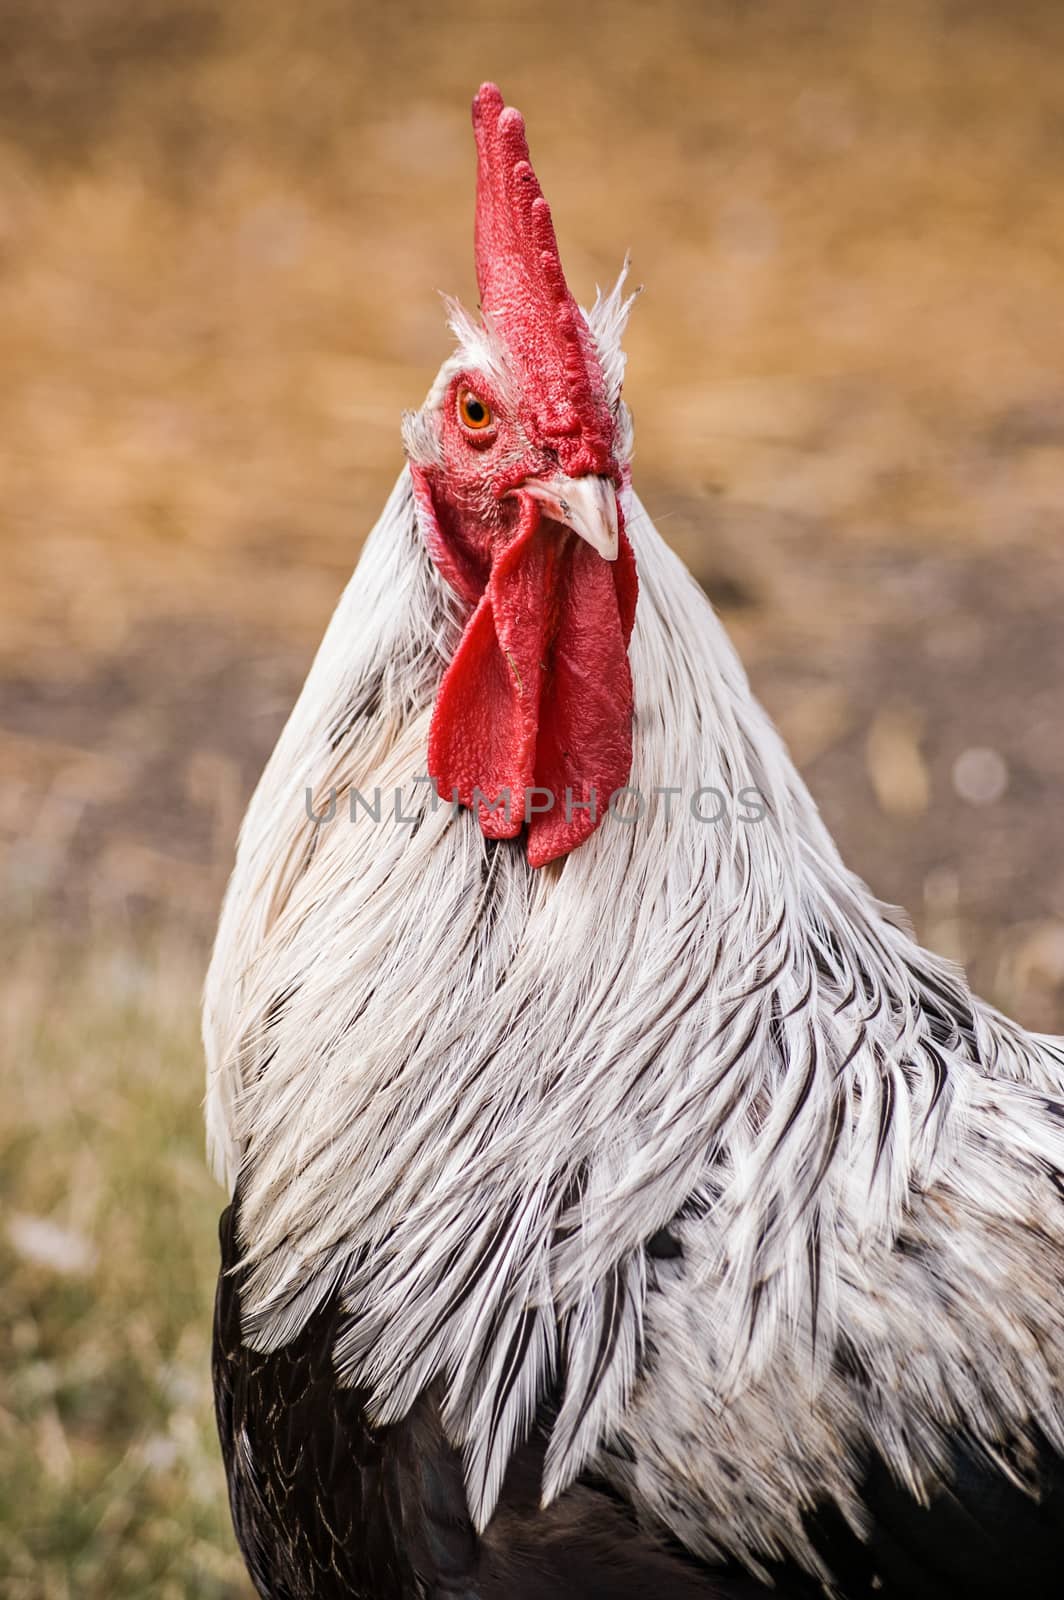 A cockerel, or rooster, looking straight at the camera.